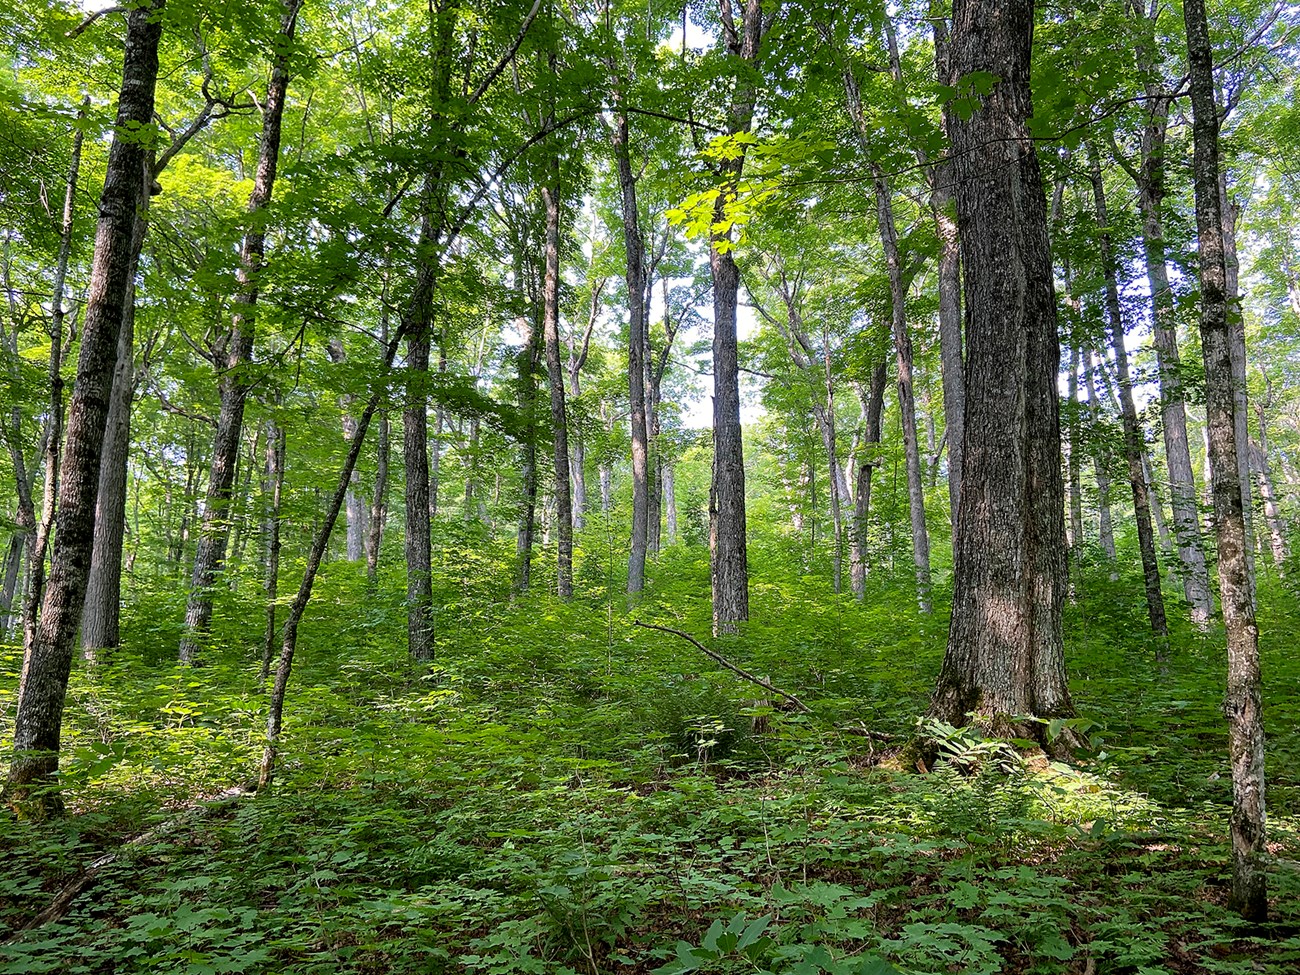 a healthy forest with overstory and understory plants